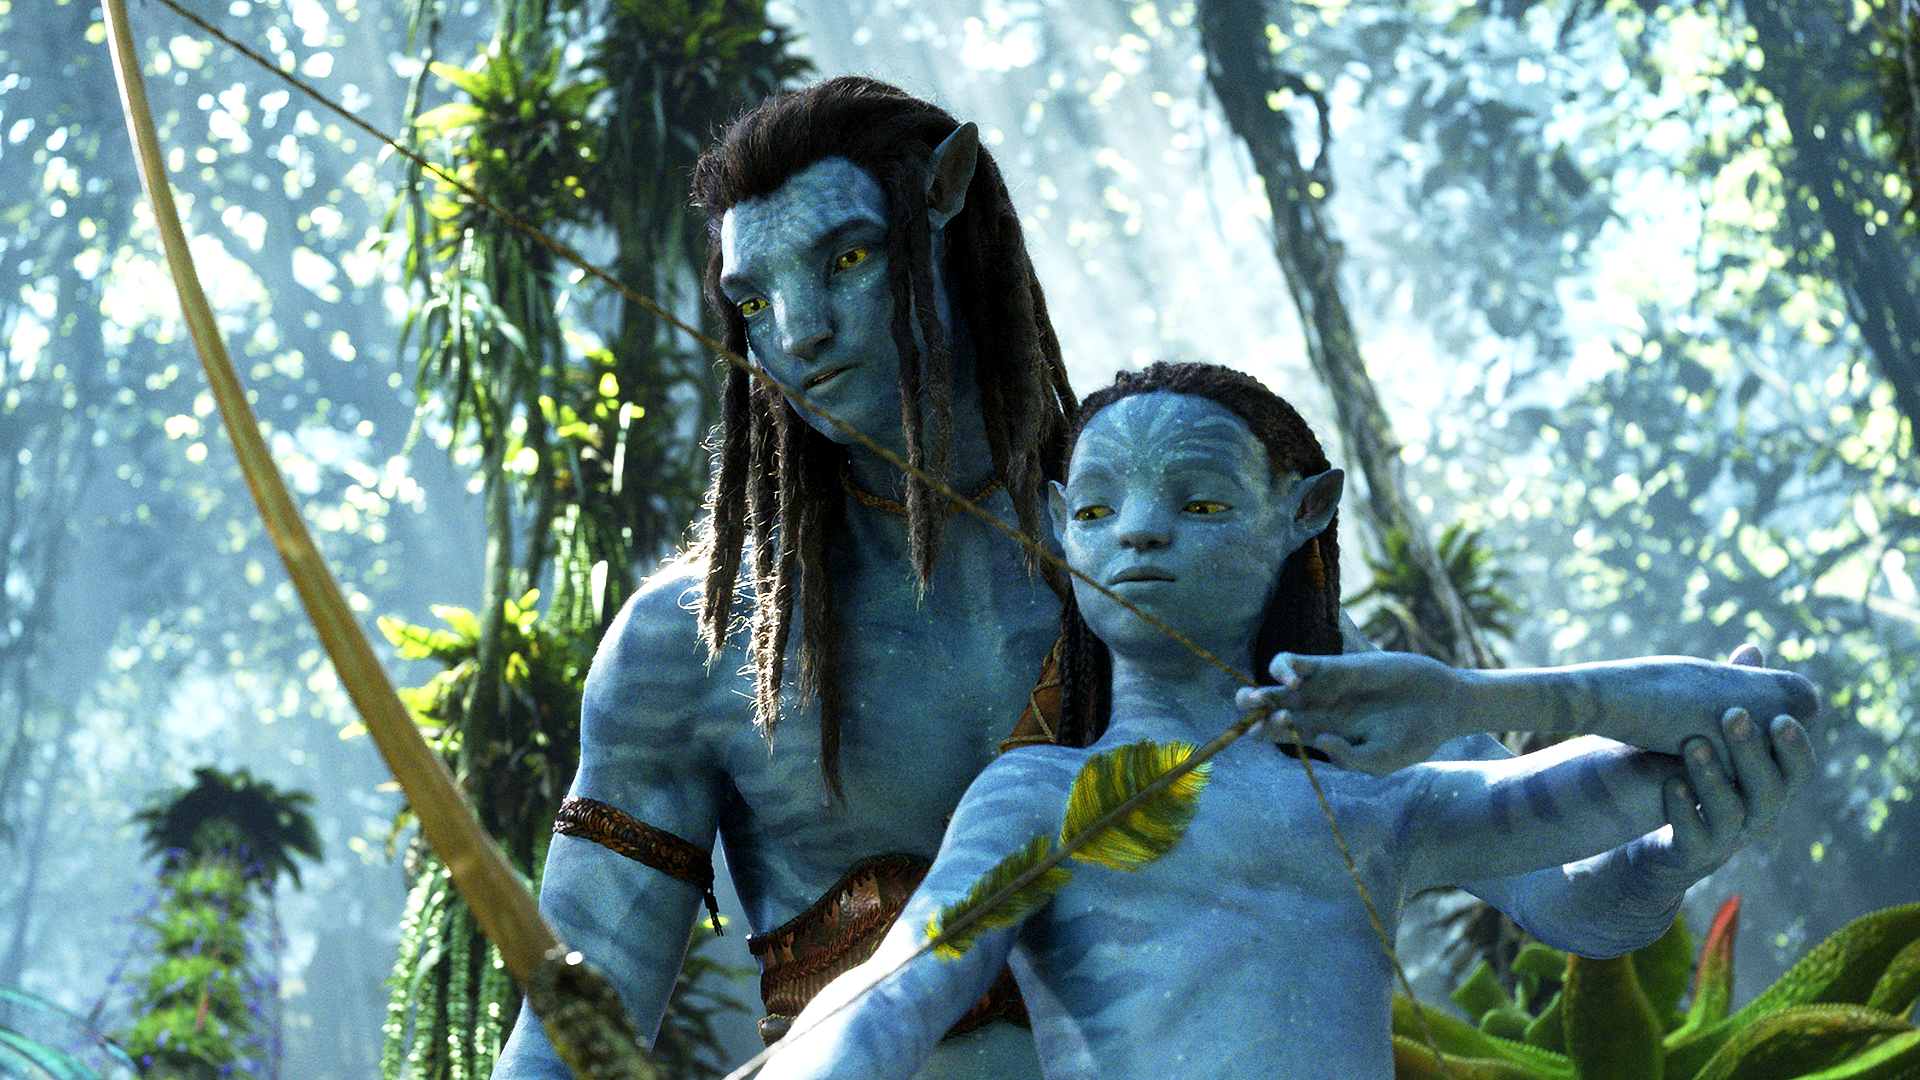 Avatar: The Way of Water Movie Review